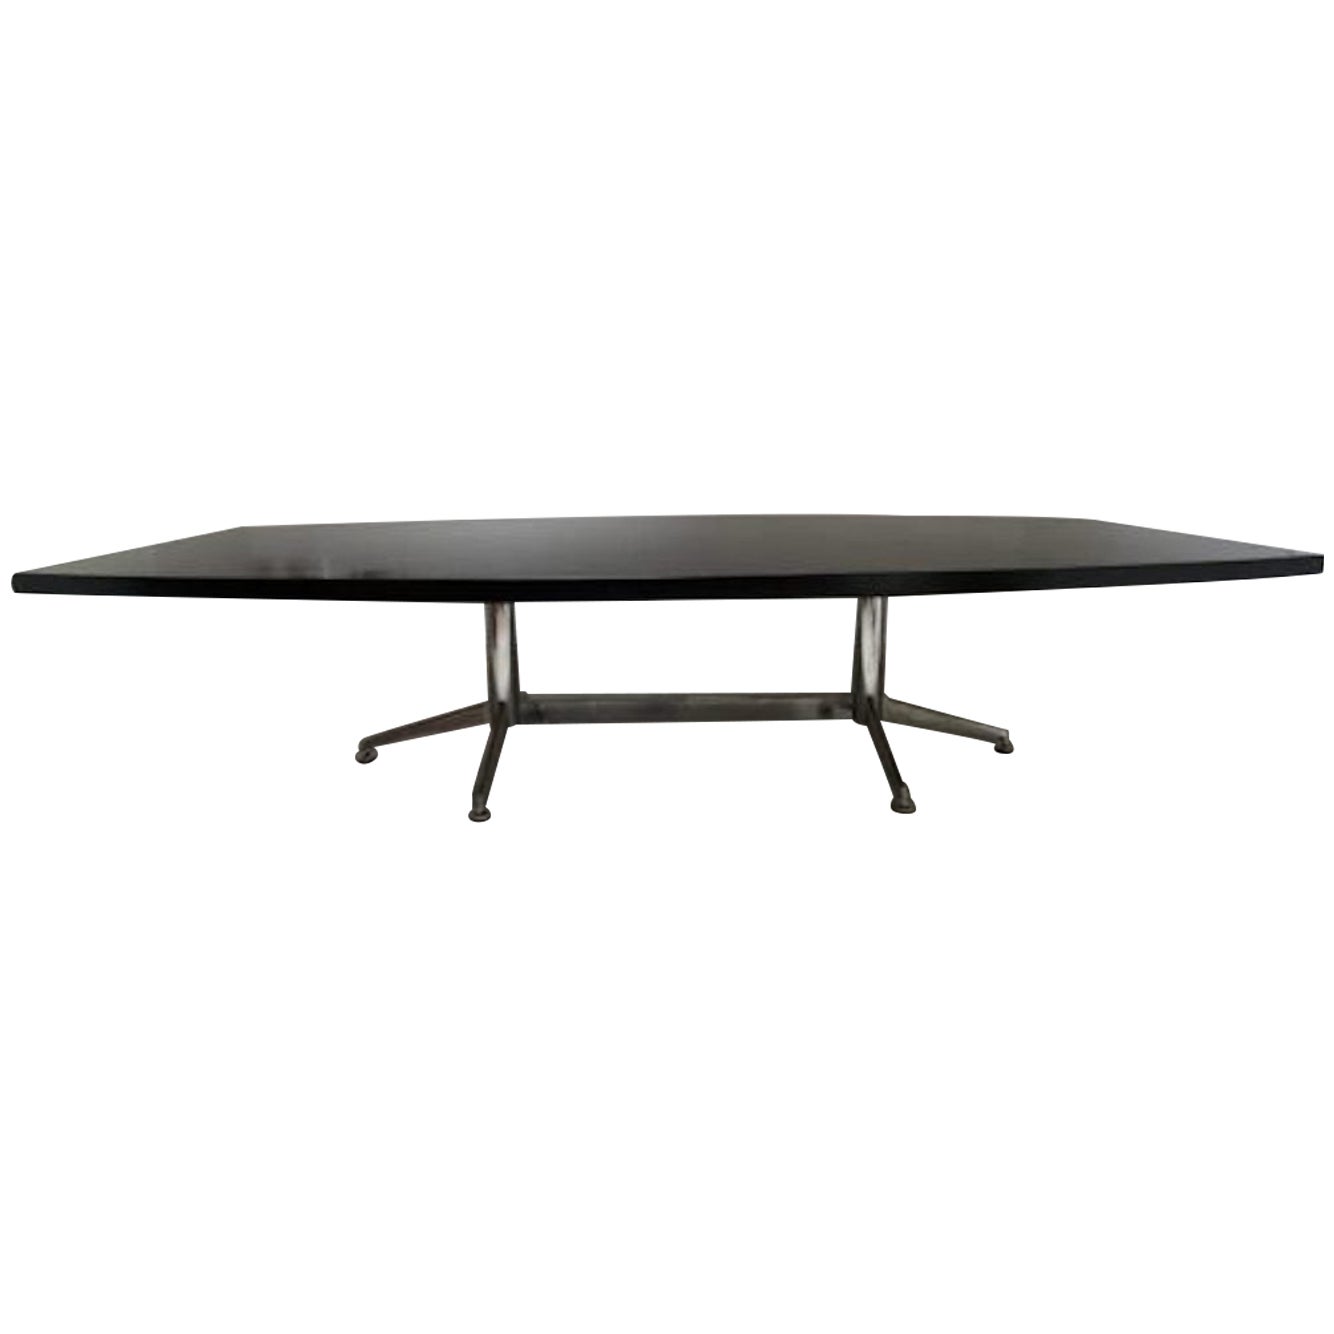 Very Large Black & Metal Dining / Conference Table